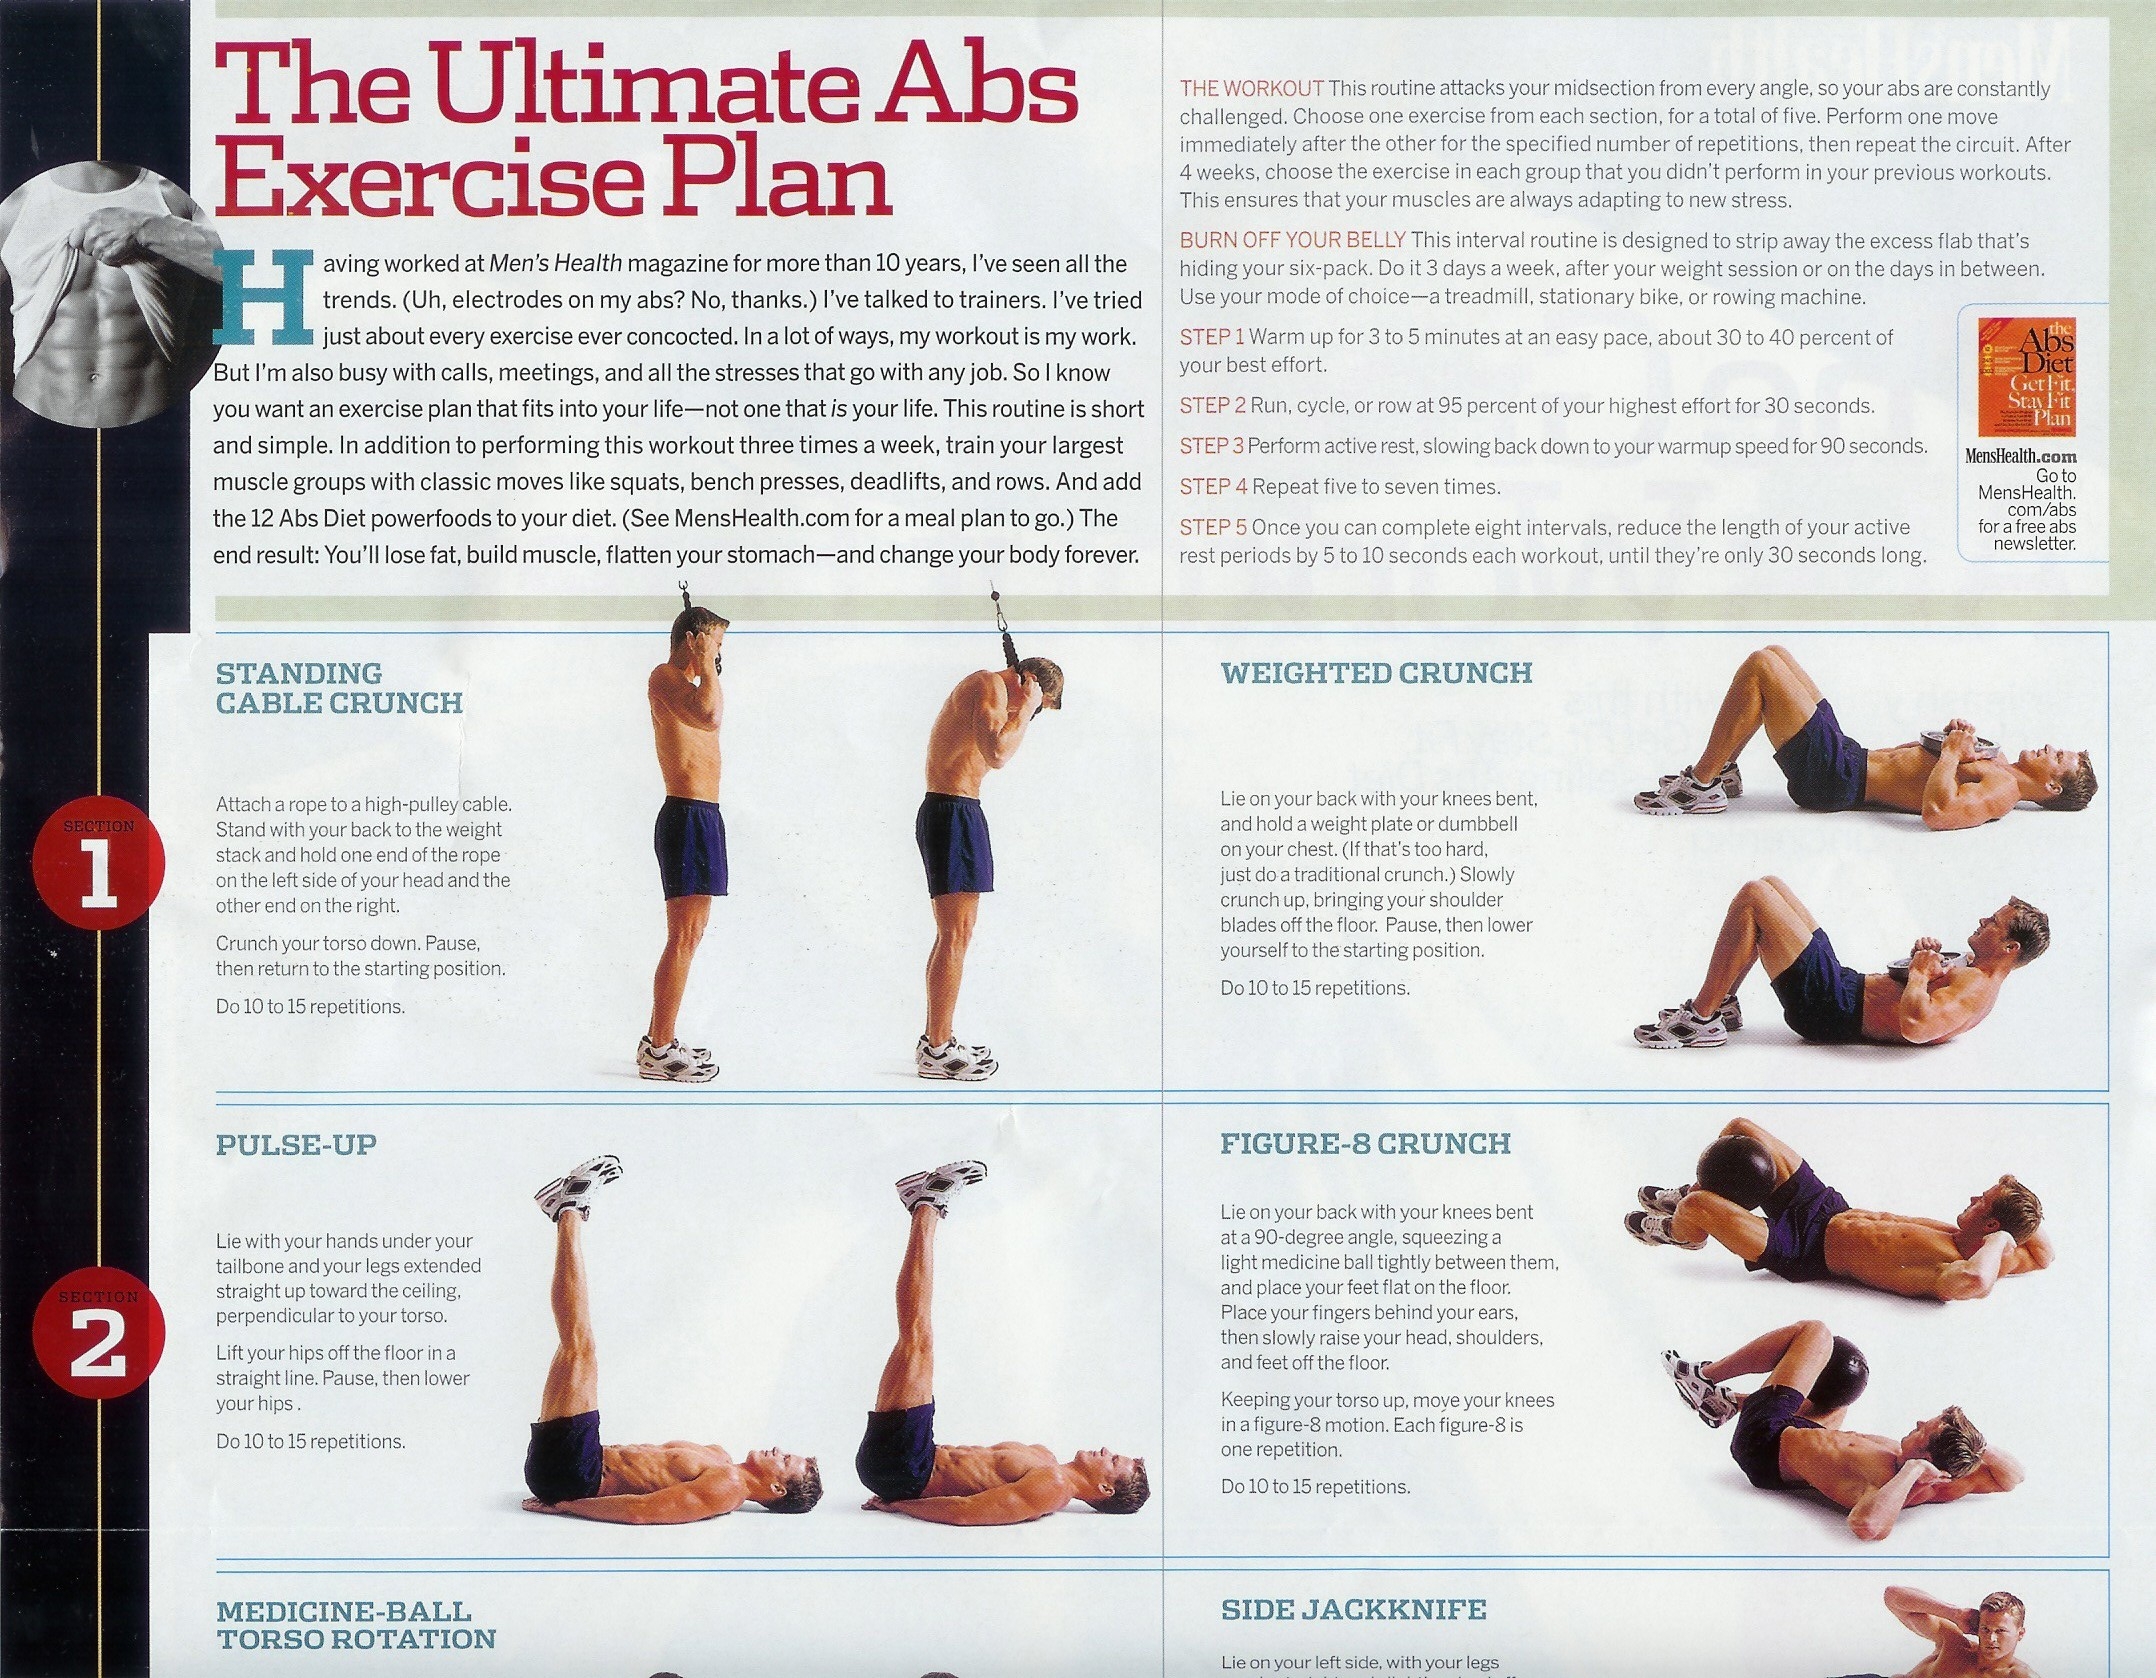 The Ultimate ABS Exercise Plan